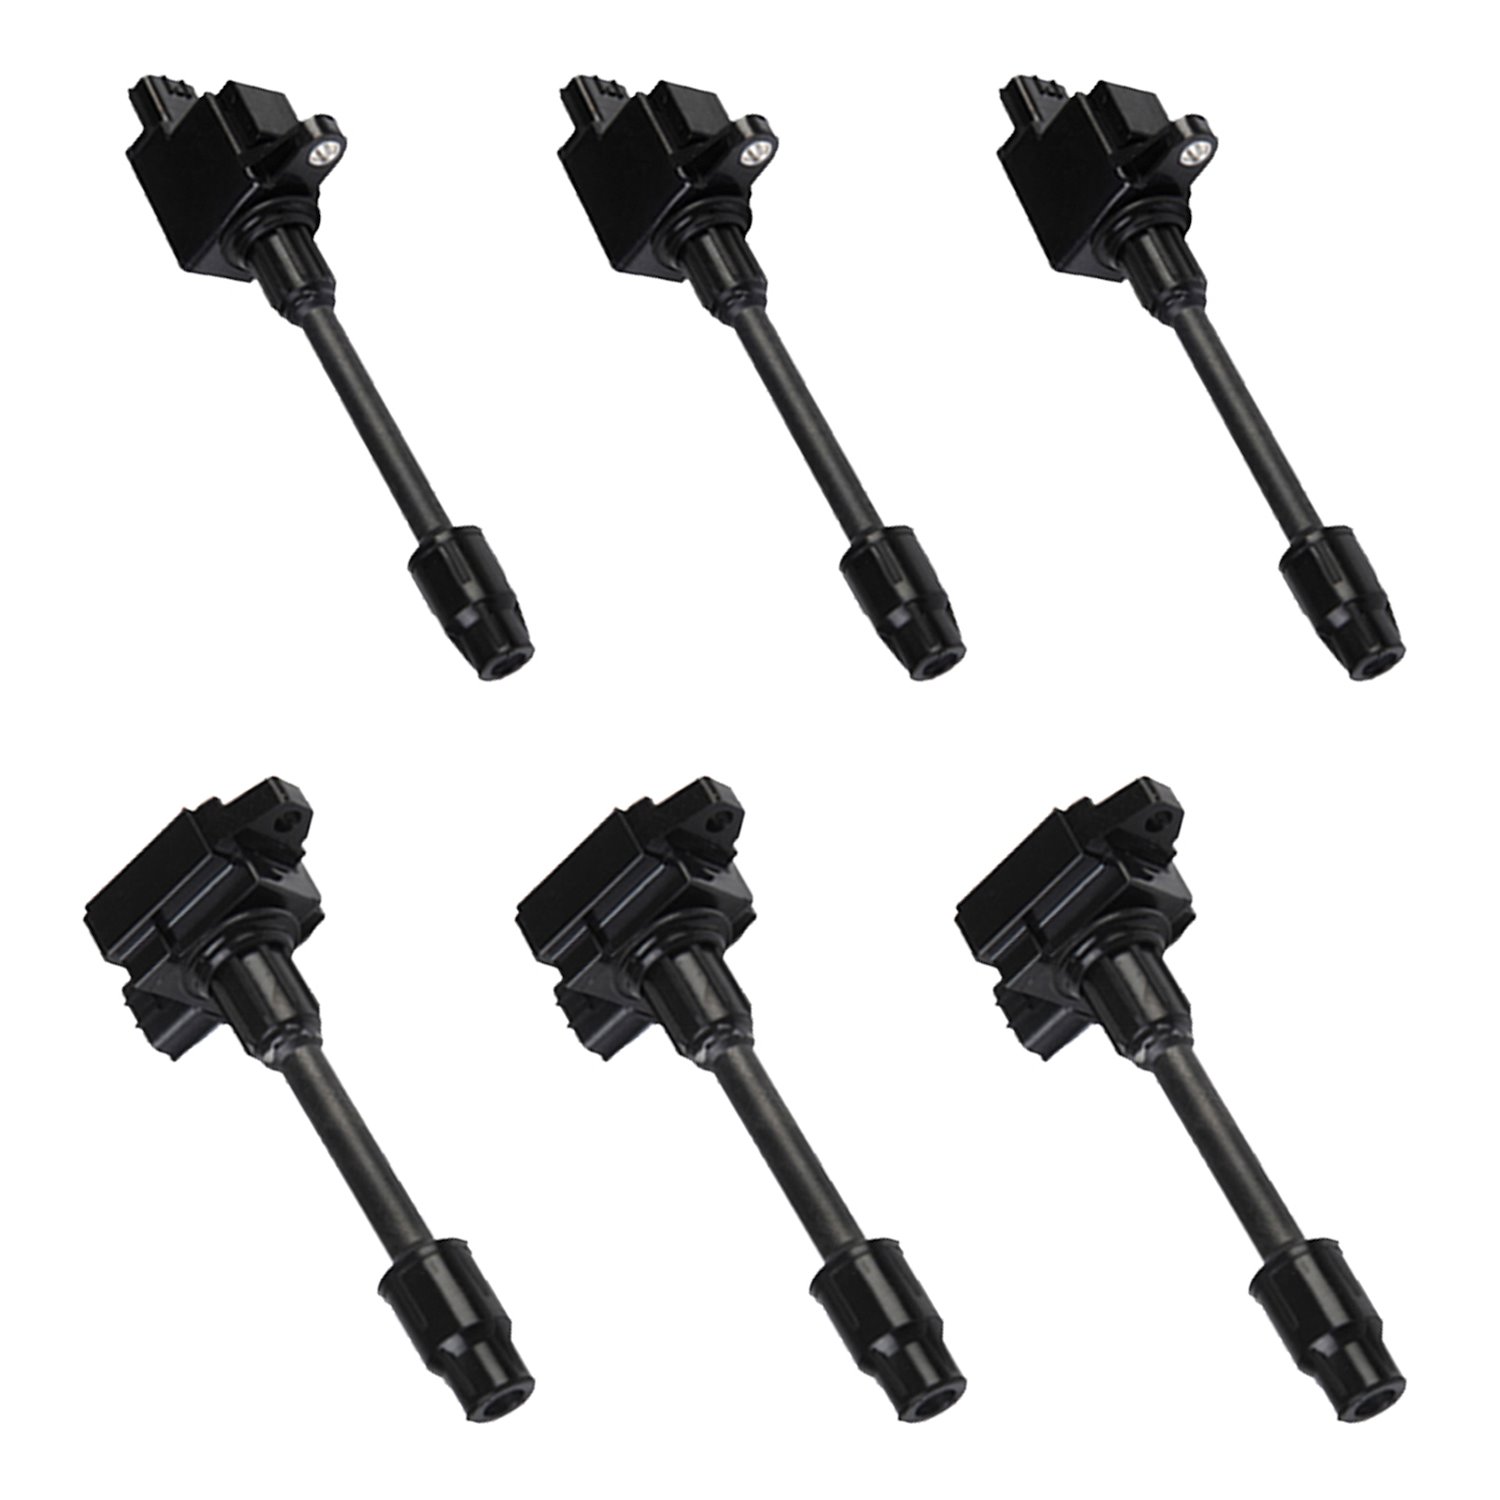 OE Replacement Ignition Coils for 2000-2001 Infiniti I30,